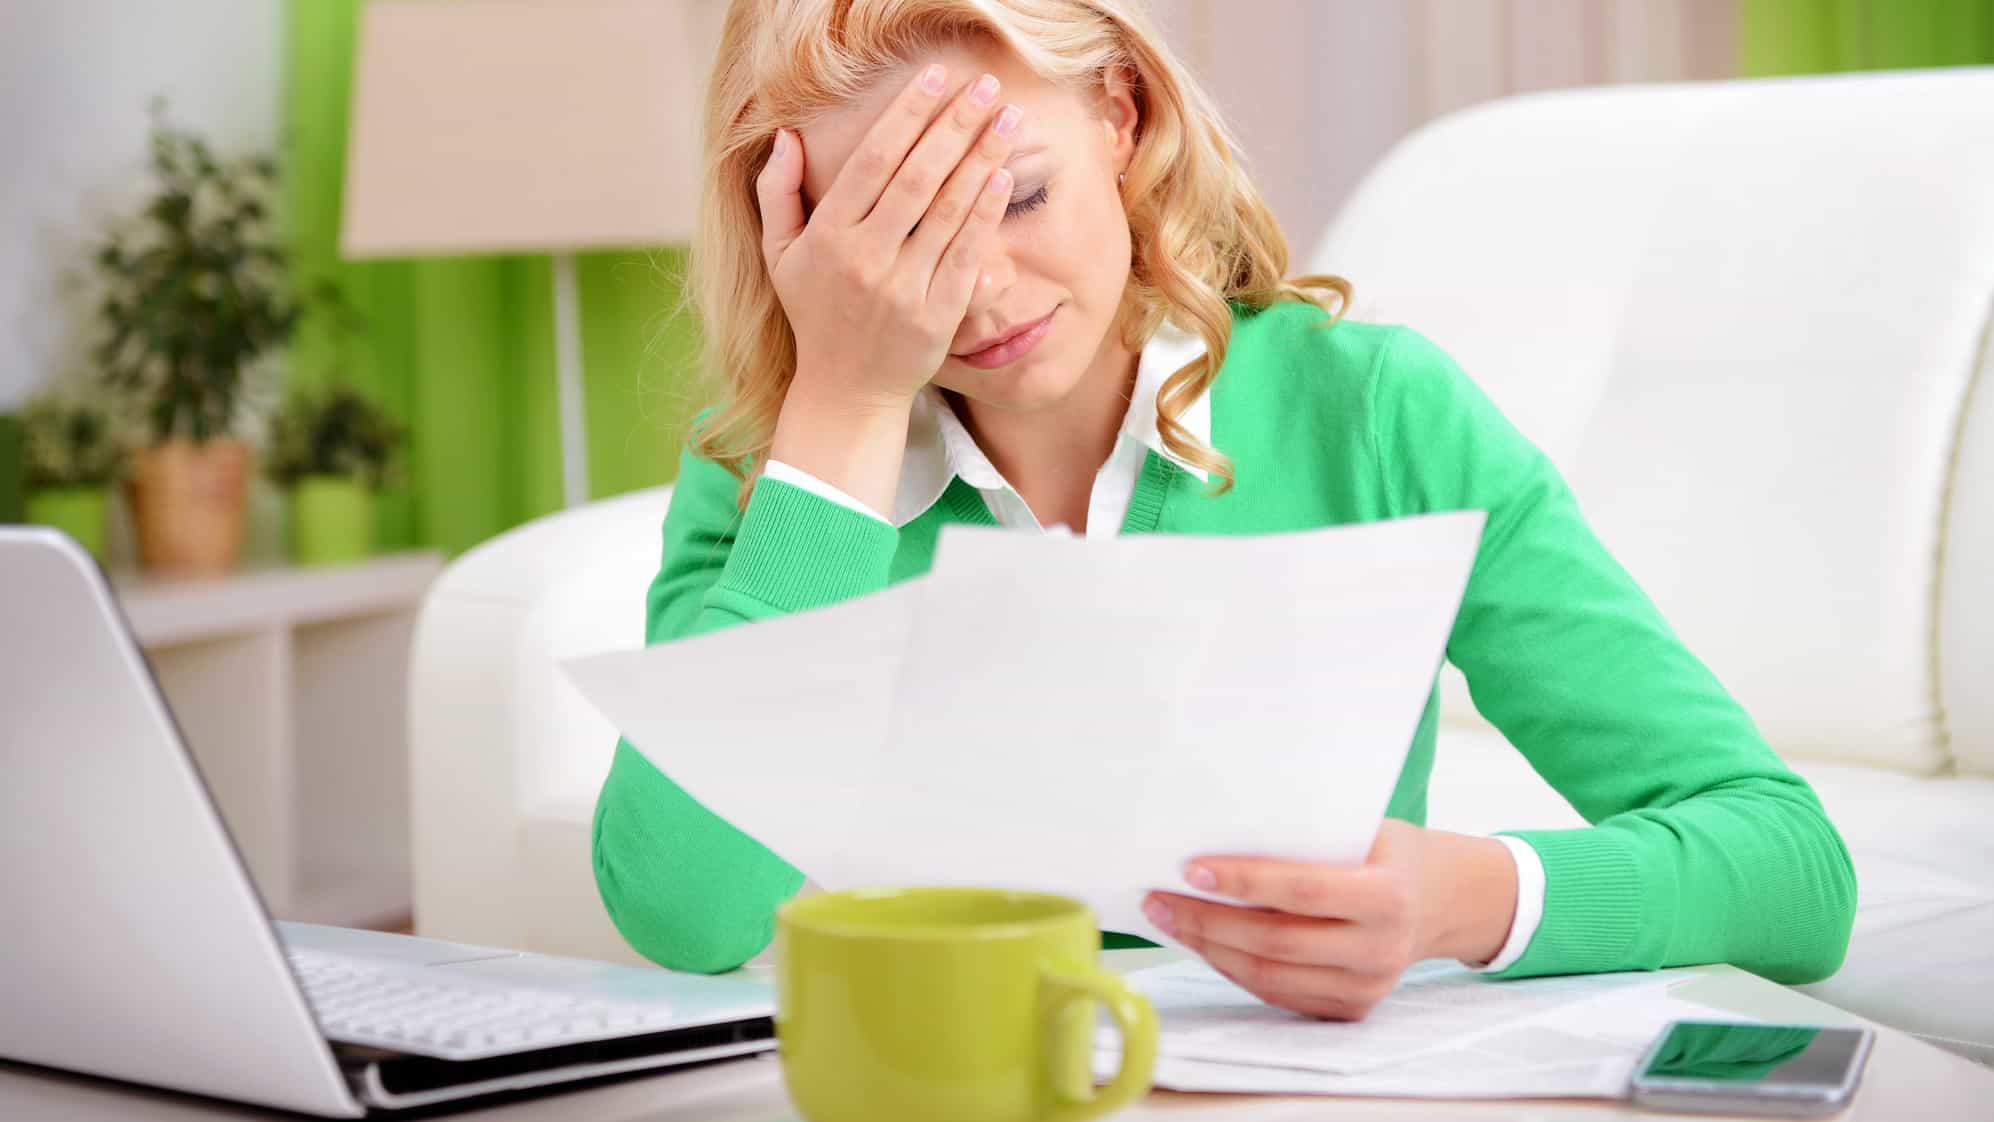 a woman wearing green and sitting in a green room with a green coffee cup puts her hand to her forehead in dismay while looking at papers sitting at her computer.